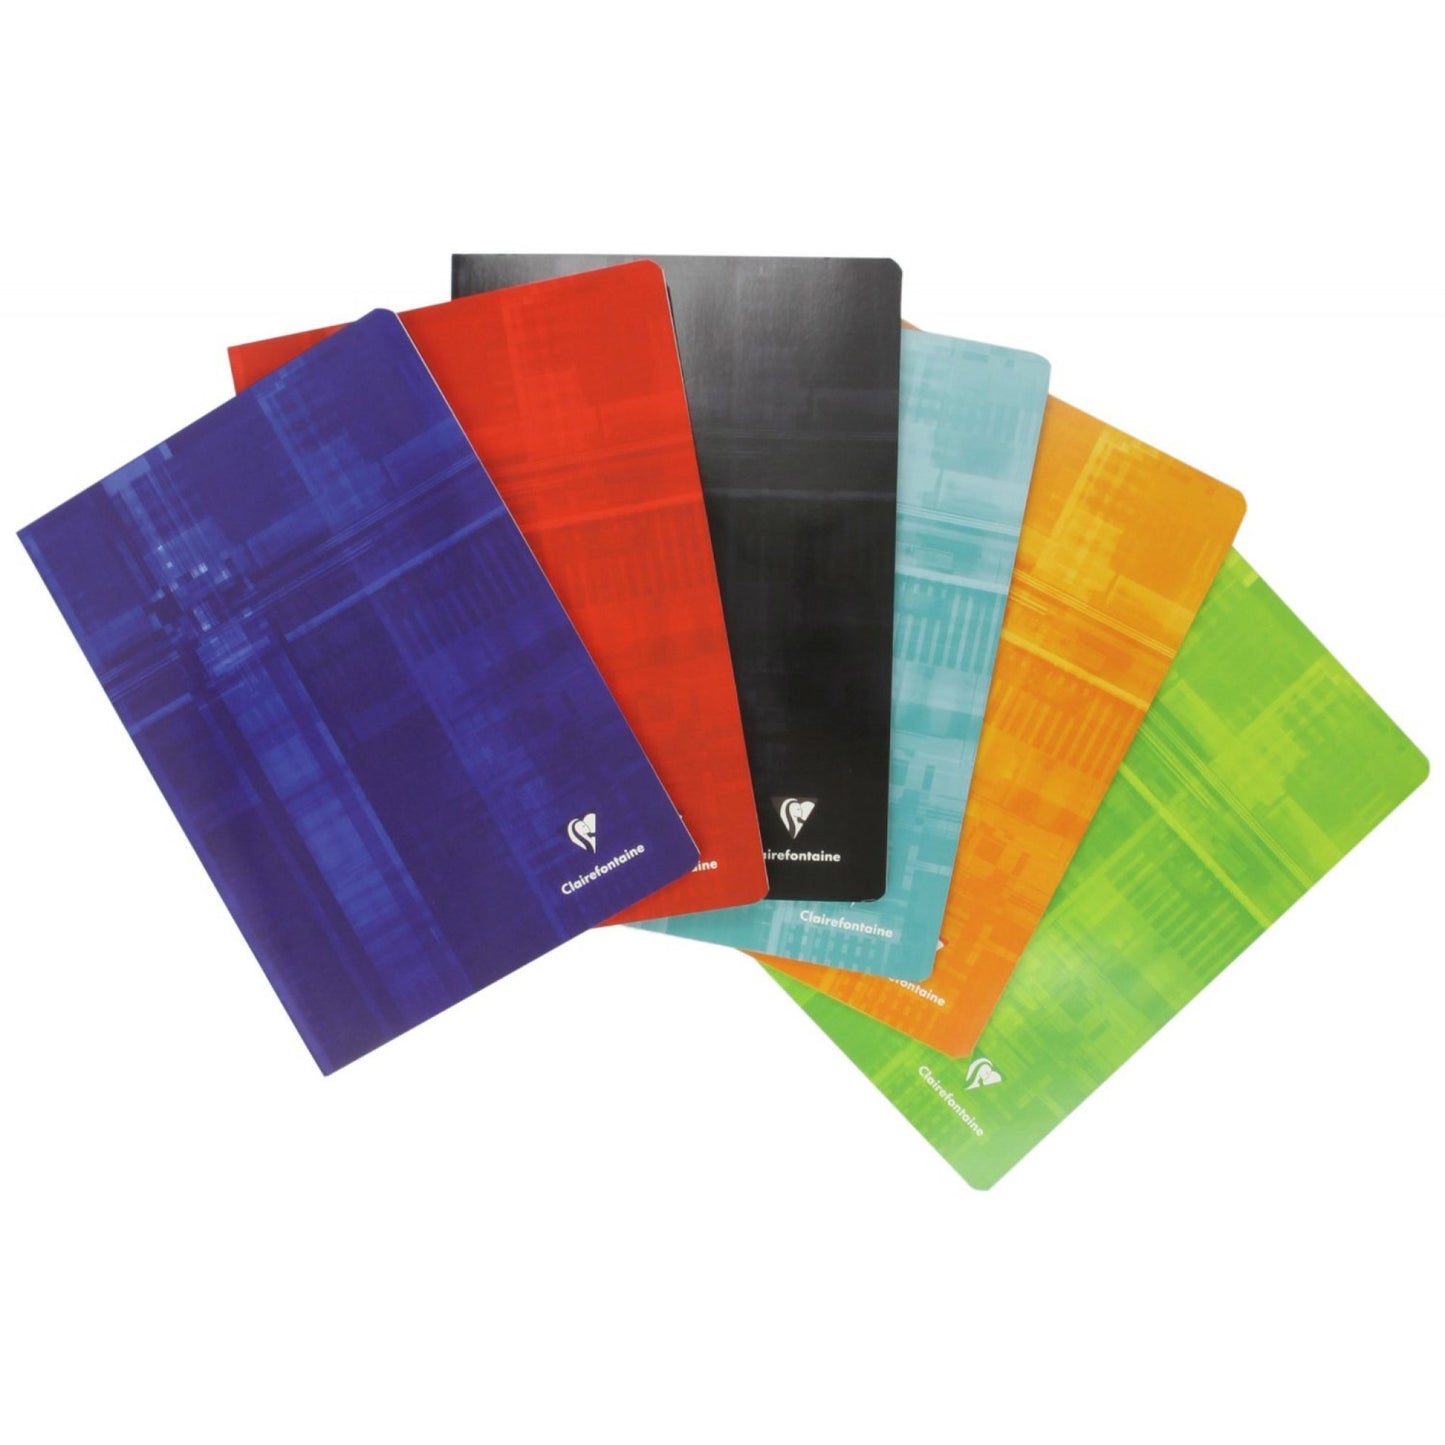 Clairefontaine #63125 Classic Lined with Margin Staplebound Notebook (8.25 x 11.75) (Assorted)